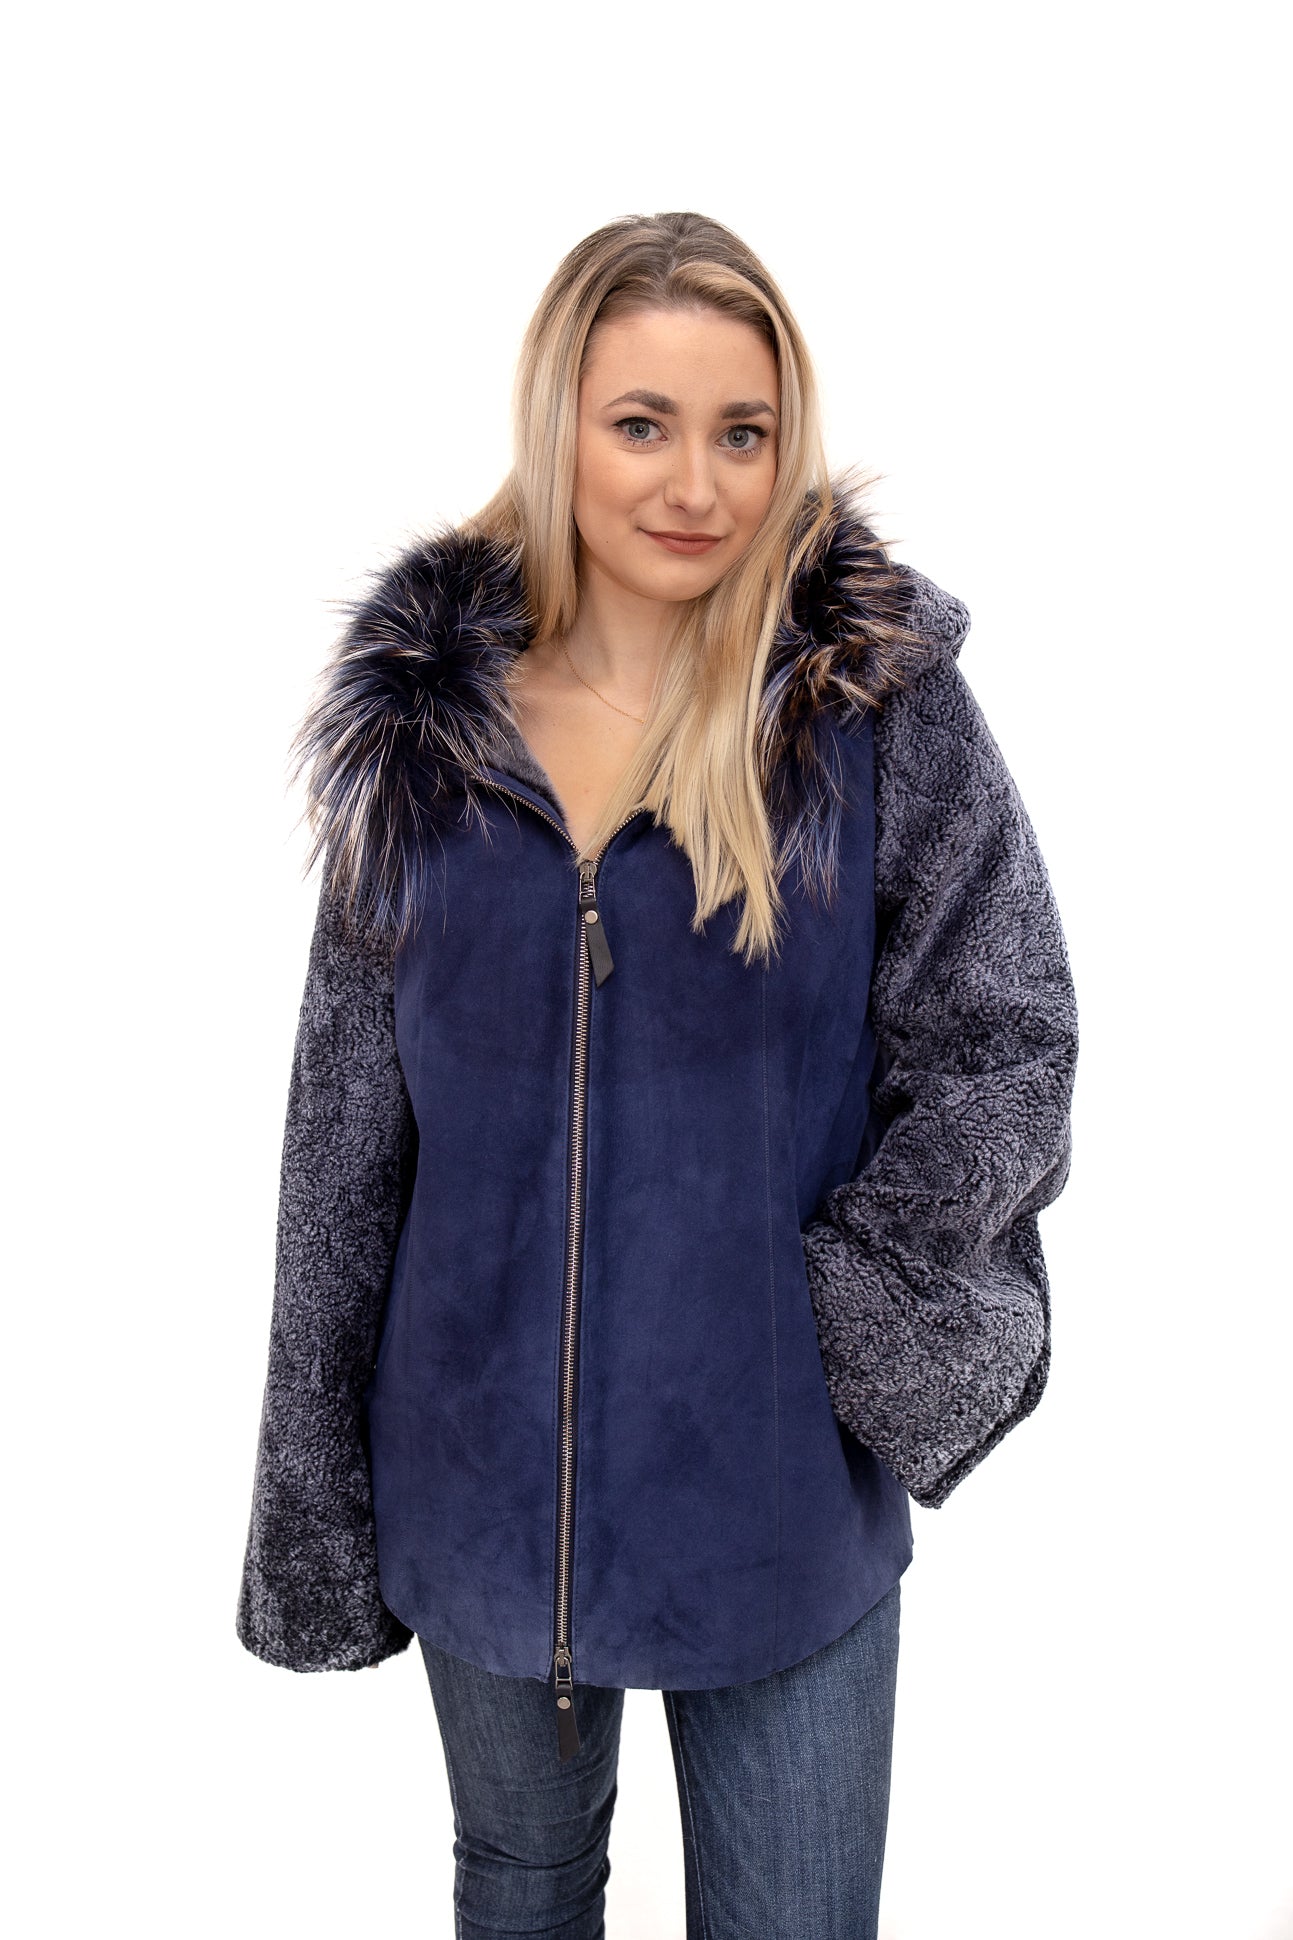 Blue Shearling Jacket with Hood Available in Cleveland at ETON Chagrin Boulevard and in Akron at Summit Mall